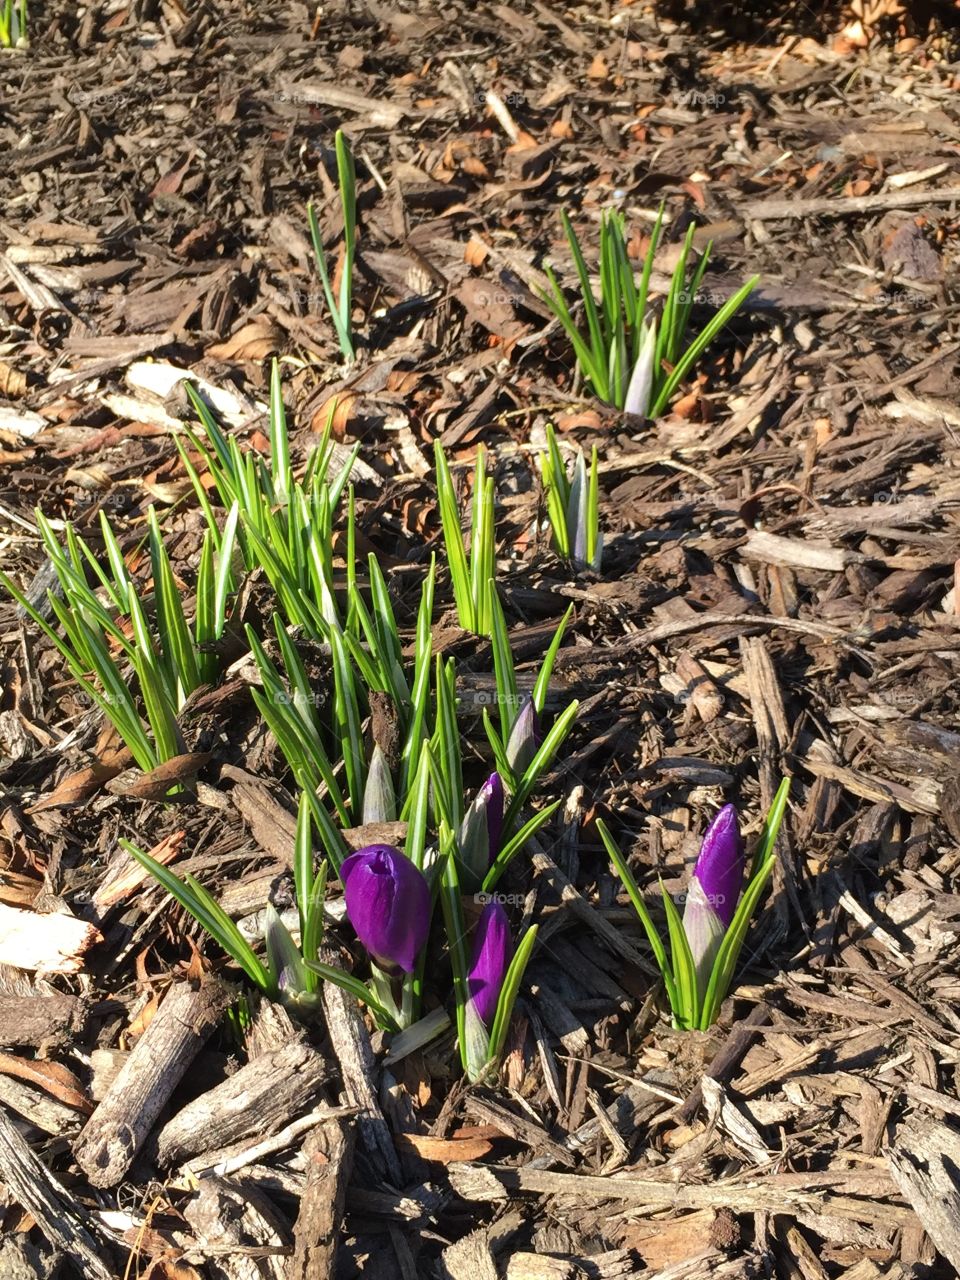 Crocus shoots are always the first sign of spring 🌱